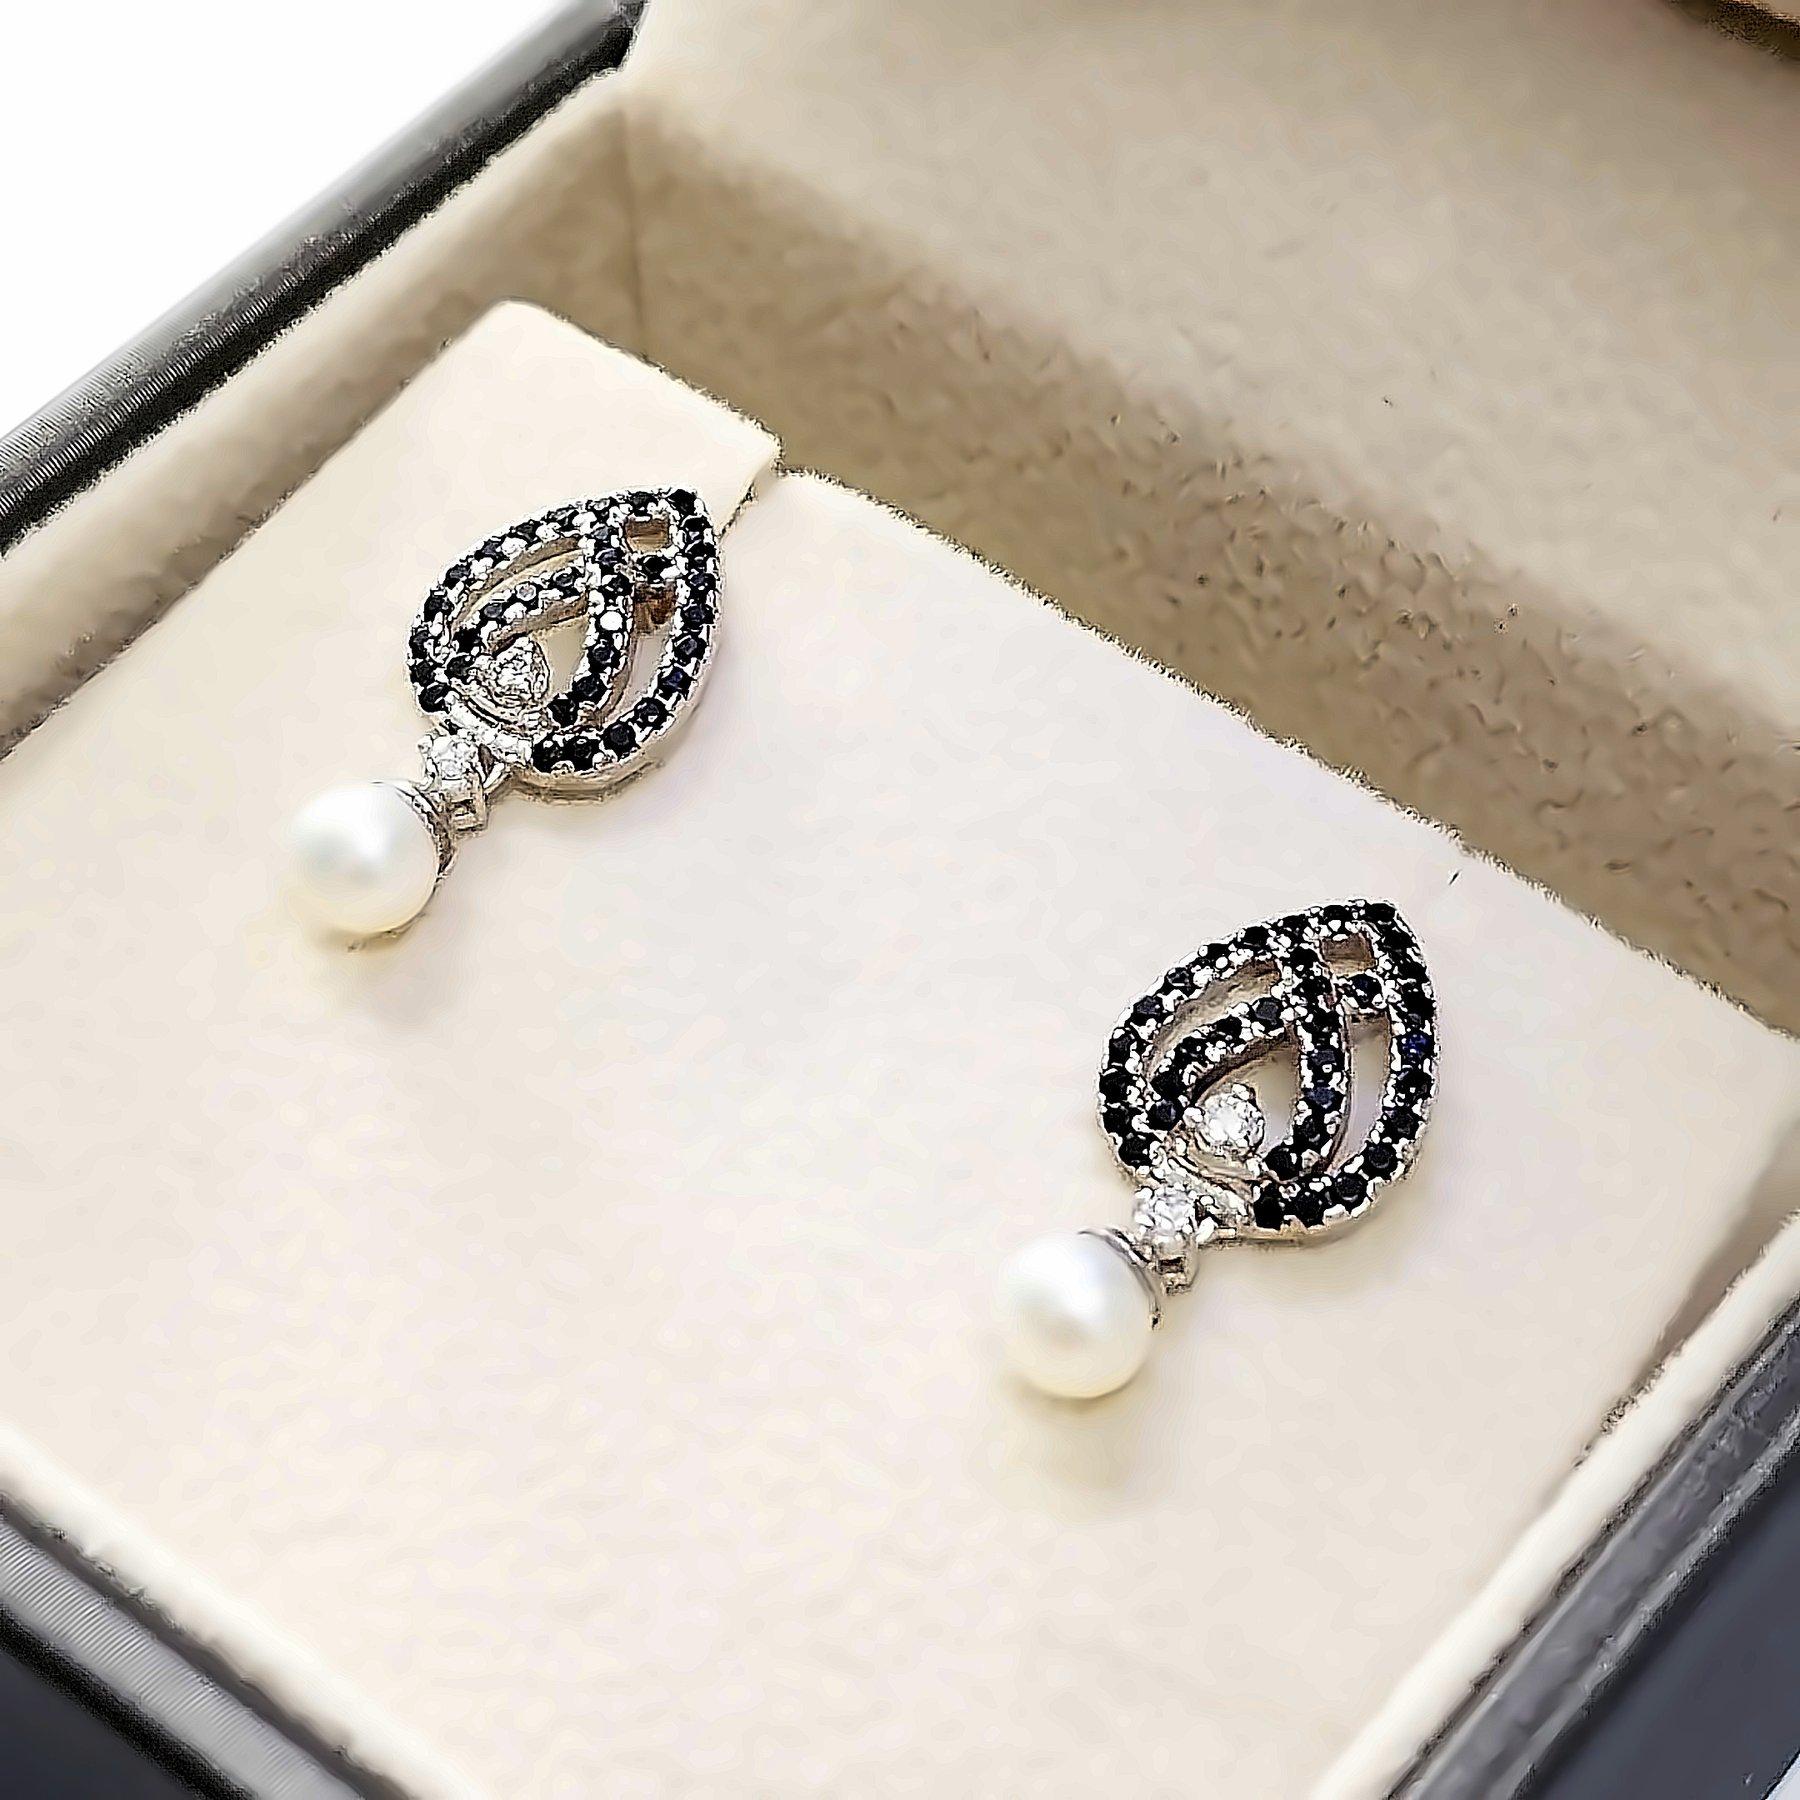 The earrings are made of 14K white gold and each earring is set with round pearl , 2 natural Diamonds and 34 natural Spinels stones.
A total of 2 Pearls, 4 Diamonds witth a total weight of 0.15 ct,  and 68 Spinels with a total weight of 0.68